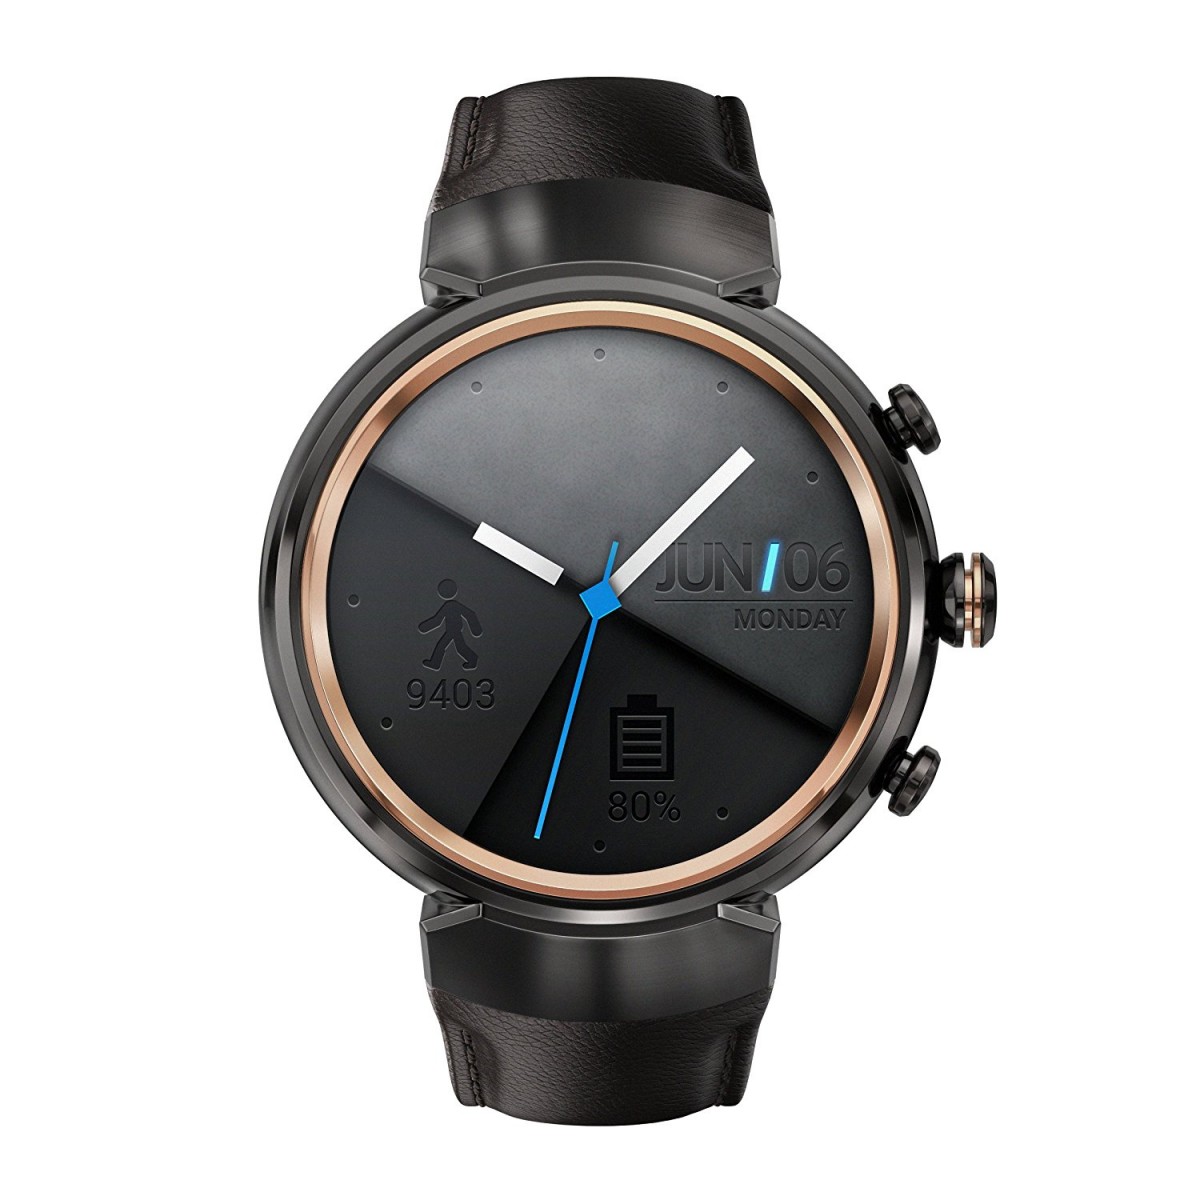 Asus ZenWatch 3 Review (The Asus ZenWatch 3.)